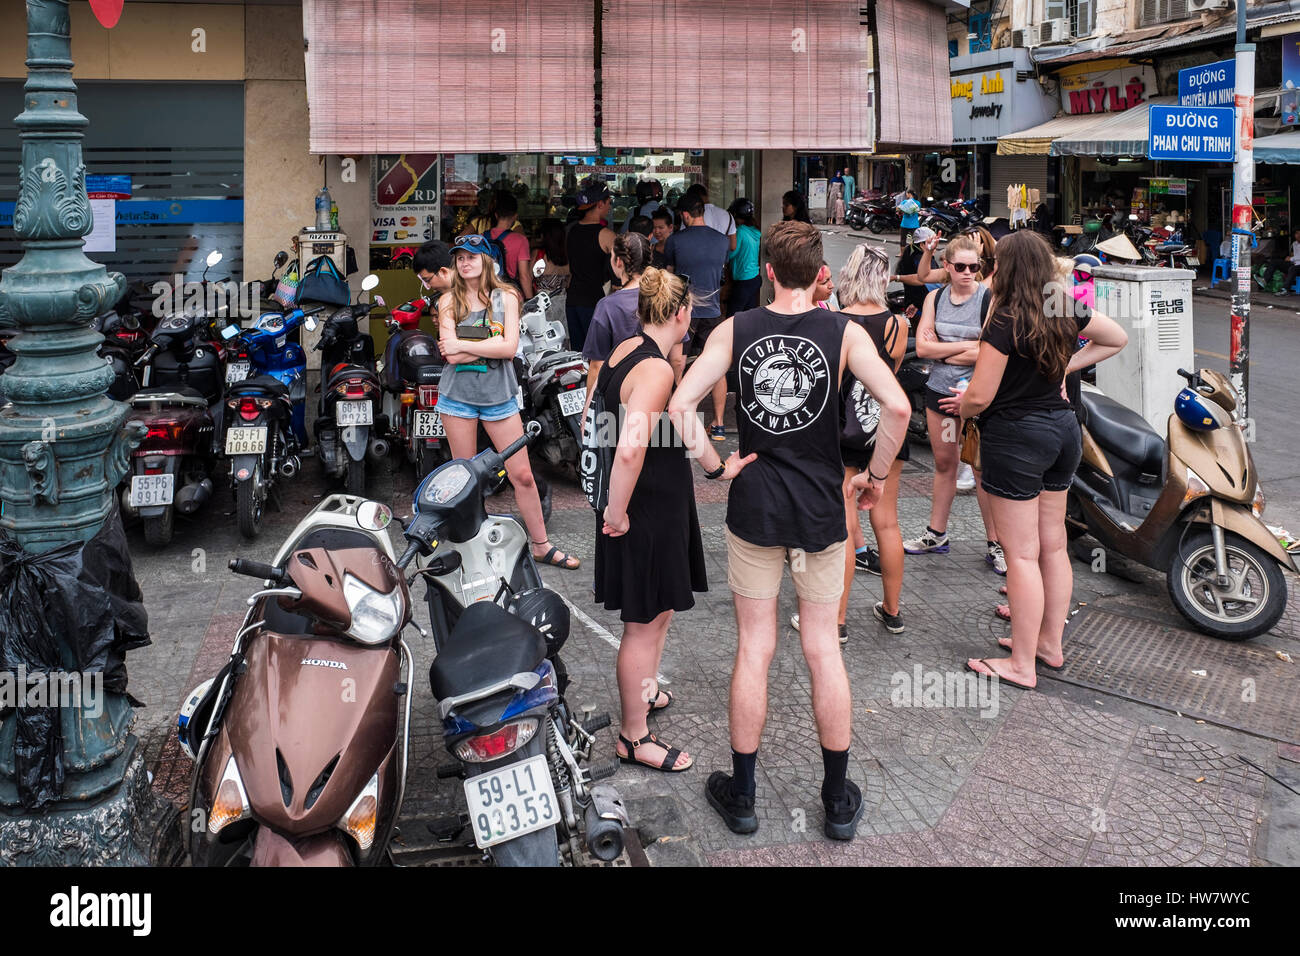 Foreign tourists gather outside of a shop, Ho Chi Minh City, Vietnam Stock Photo